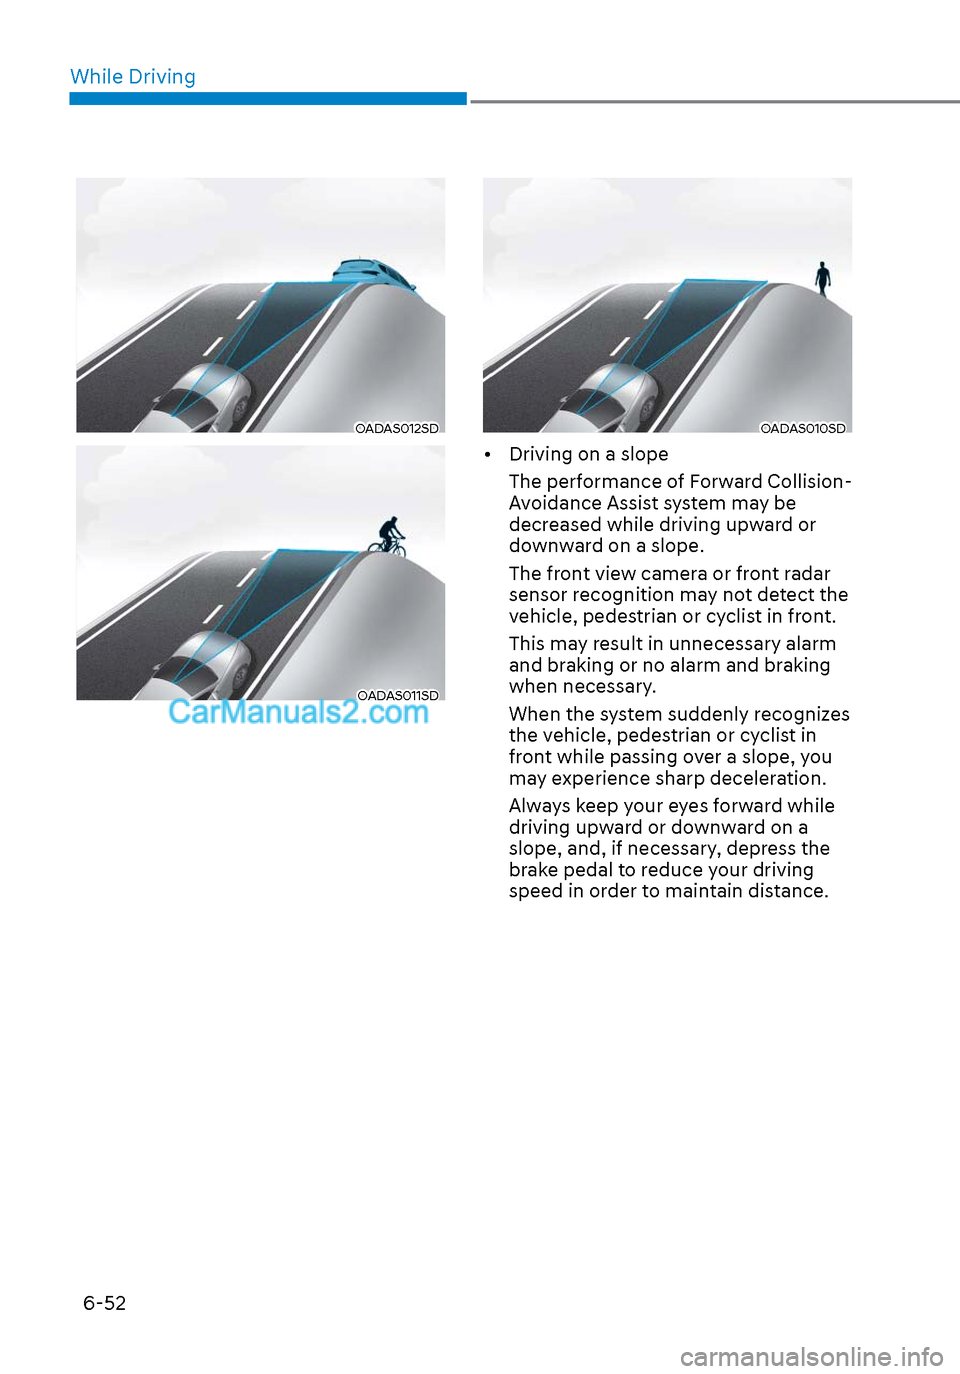 Hyundai Sonata 2020 User Guide While Driving6-52
OADAS012SDOADAS012SD
OADAS011SDOADAS011SD
OADAS010SDOADAS010SD
•  Driving on a slope The performance of Forward Collision-
Avoidance Assist system may be 
decreased while driving u